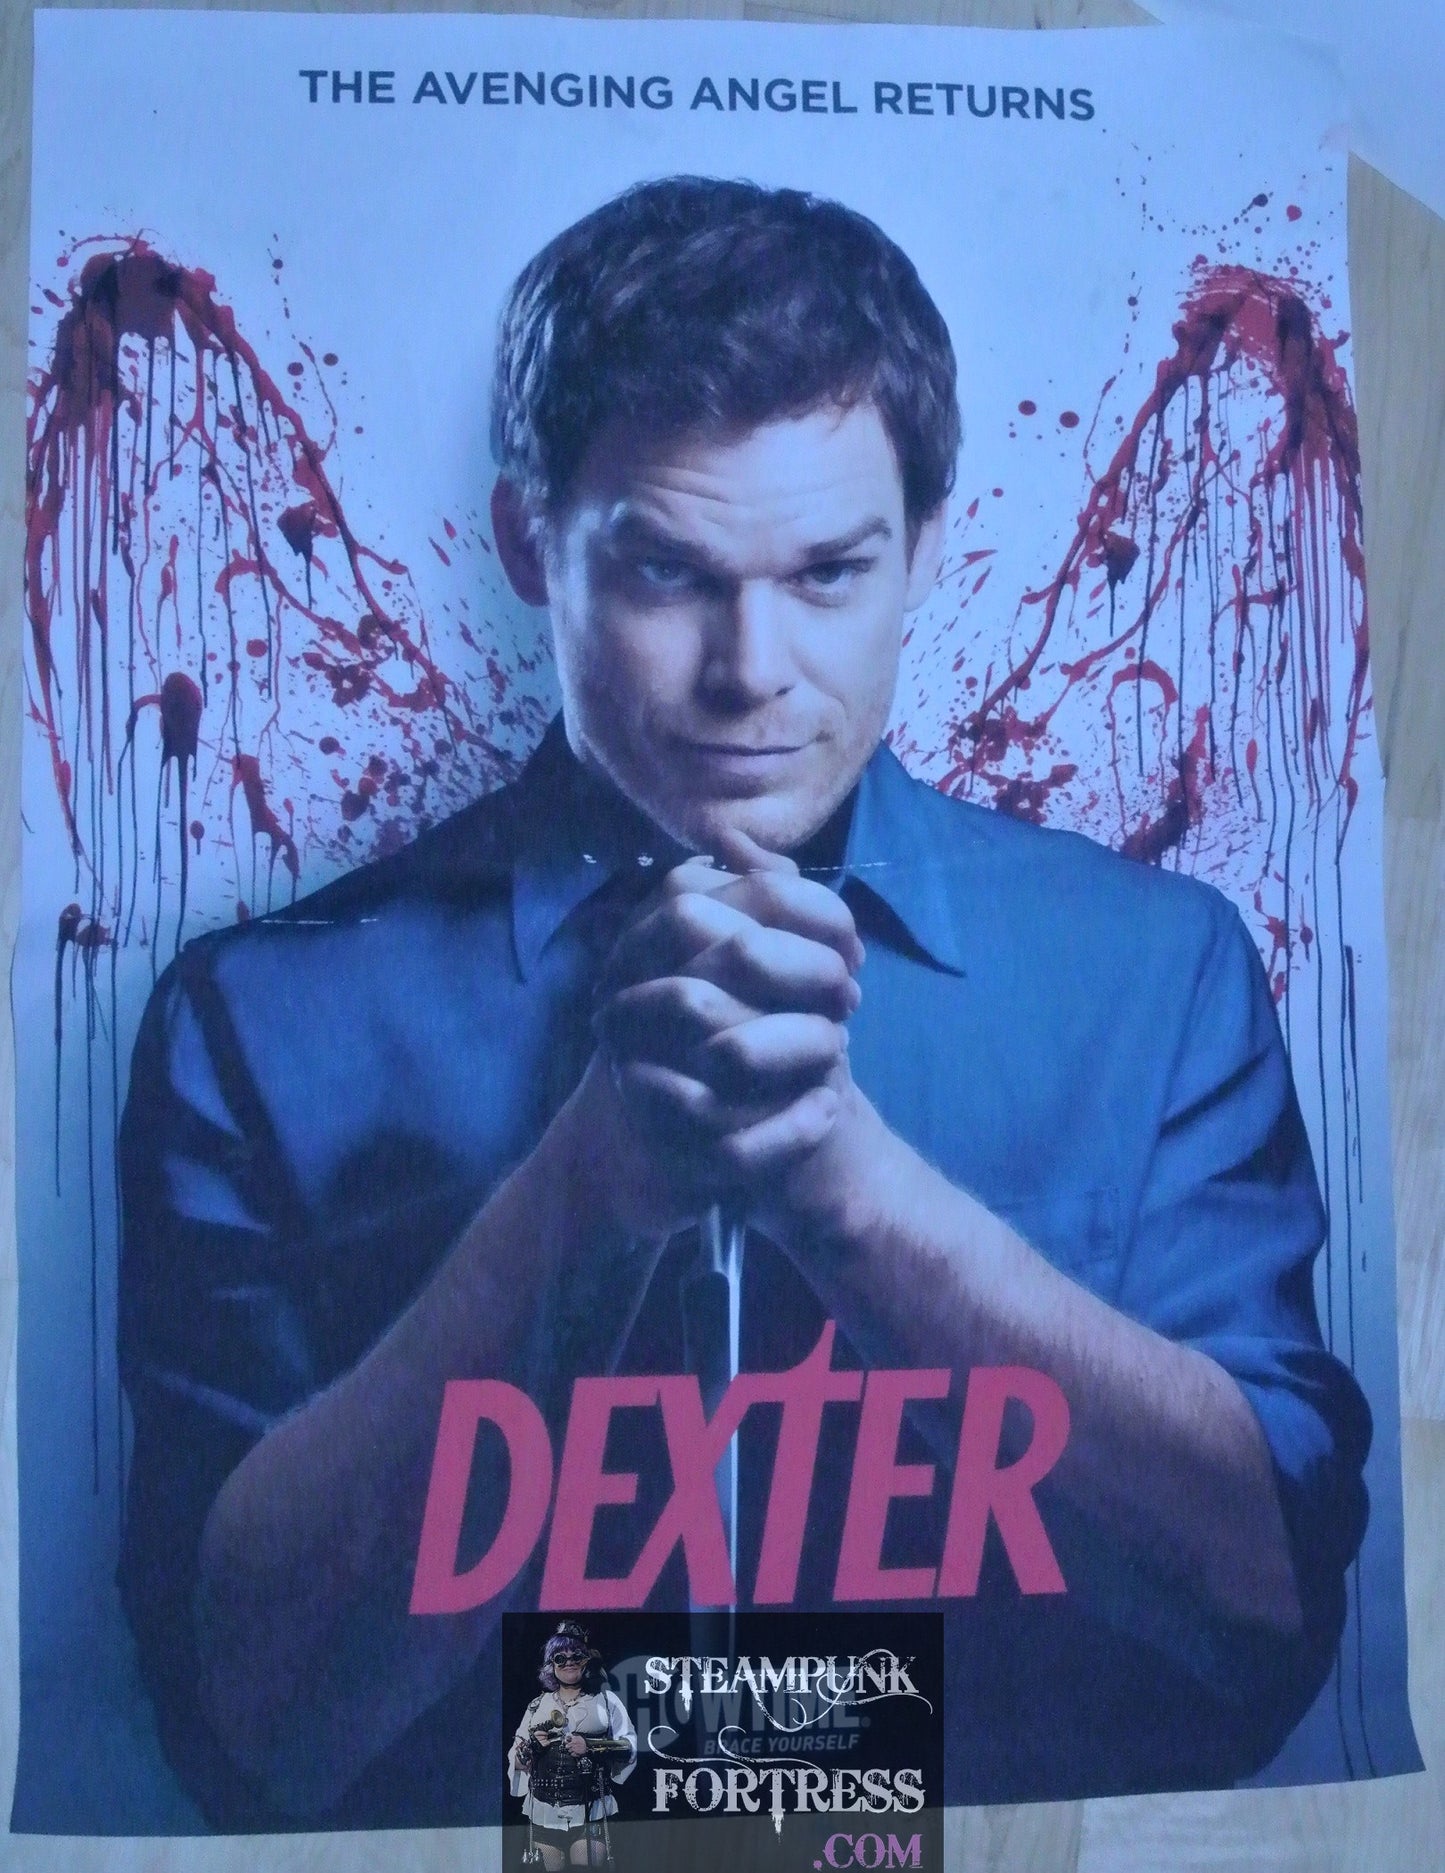 DEXTER AVENGING ANGEL RETURNS FABRIC POSTER BLOOD WINGS MICHAEL C HALL